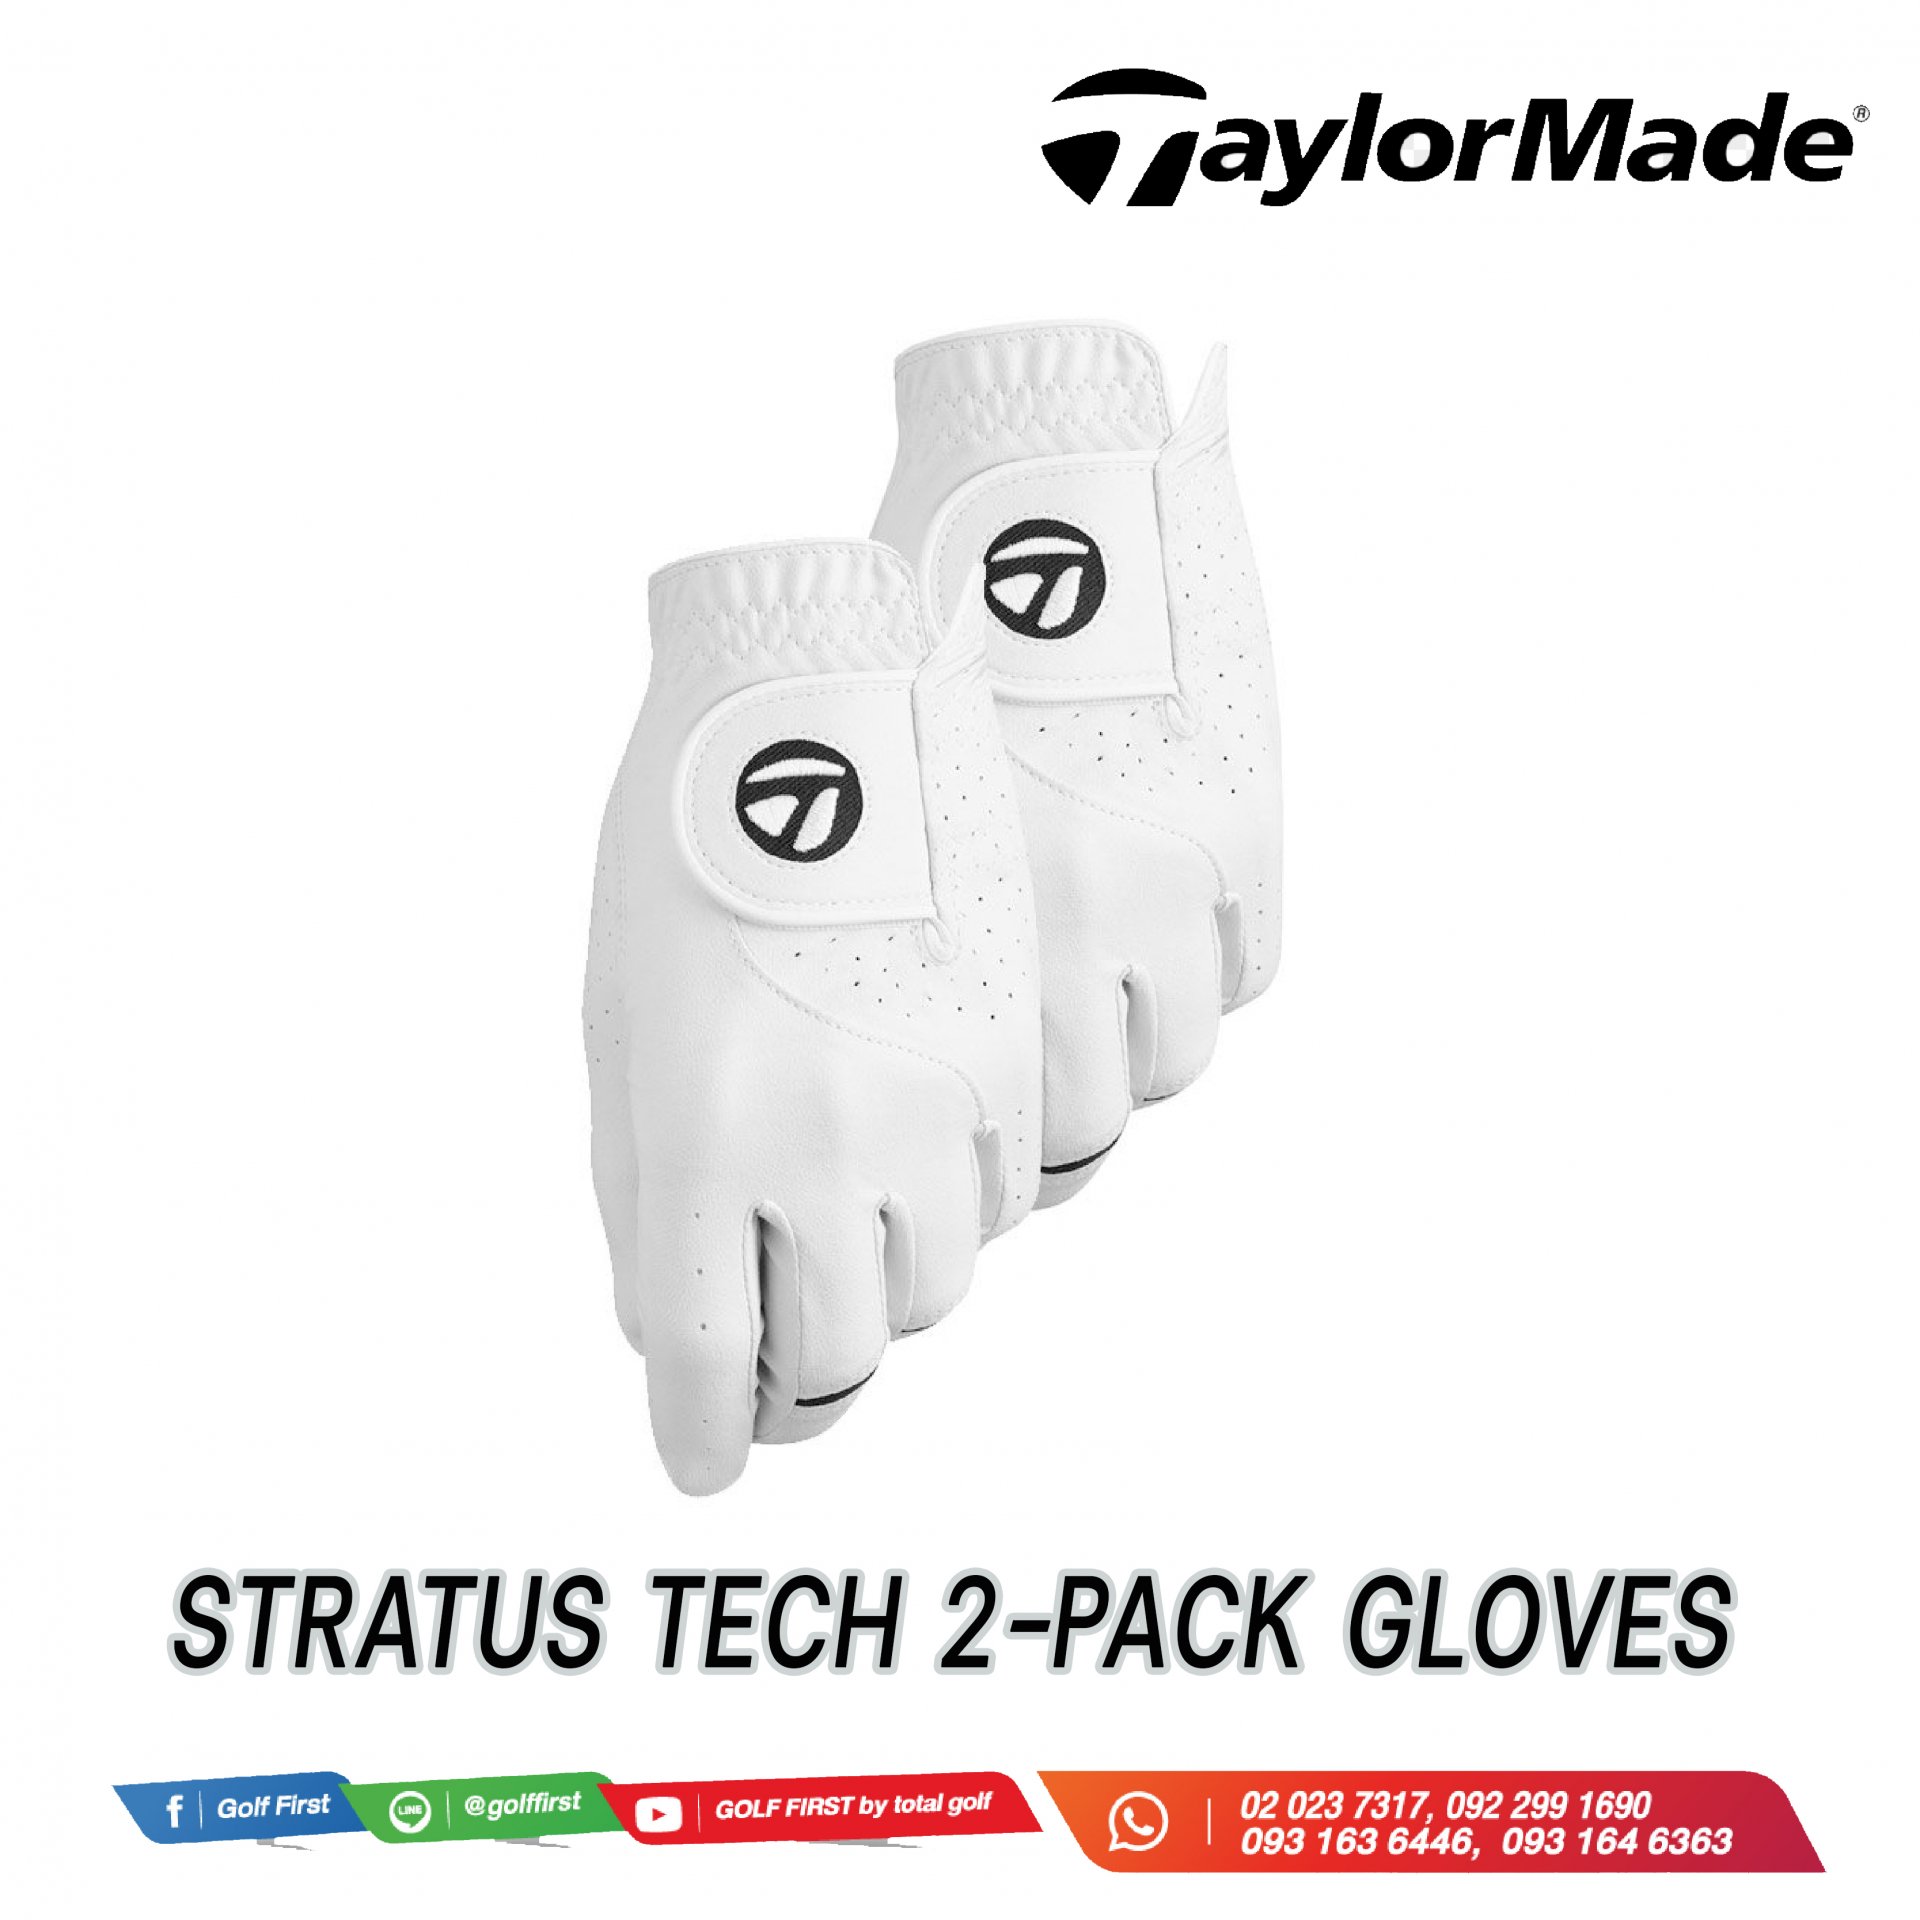 STRATUS TECH 2-PACK GLOVES